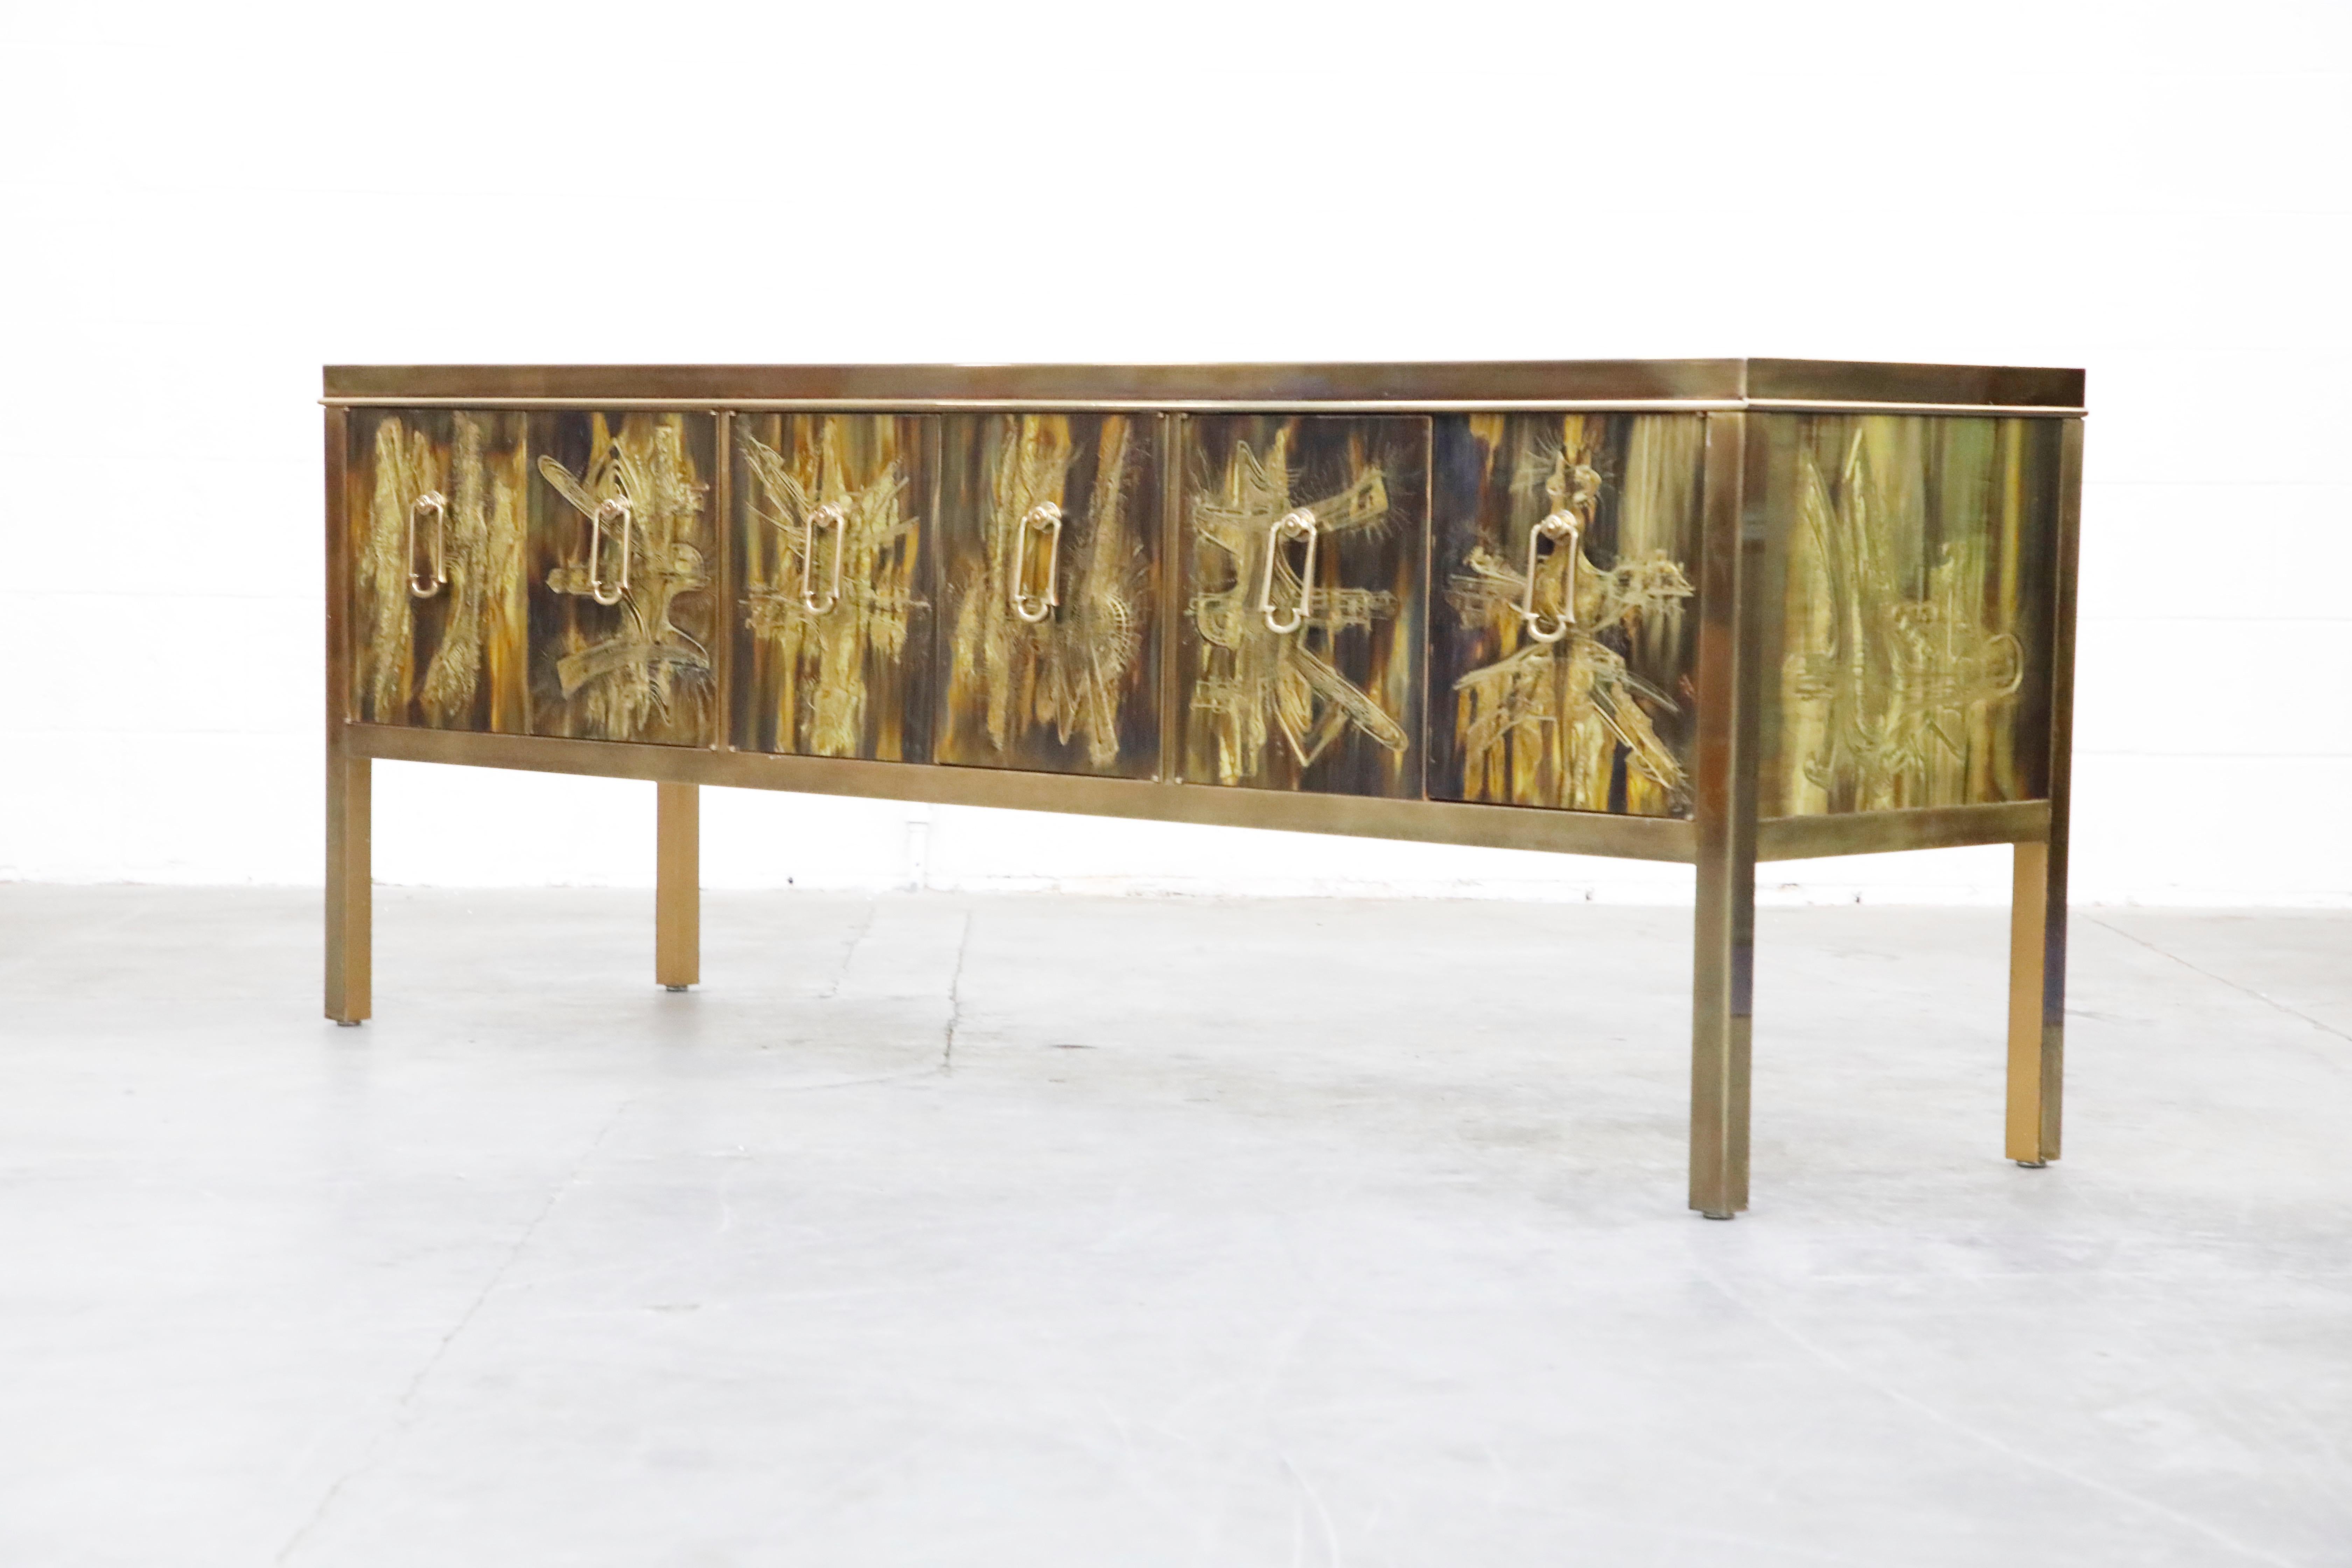 Lacquered Bernhard Rohne for Mastercraft Acid Etched Brass Credenza, 1970s